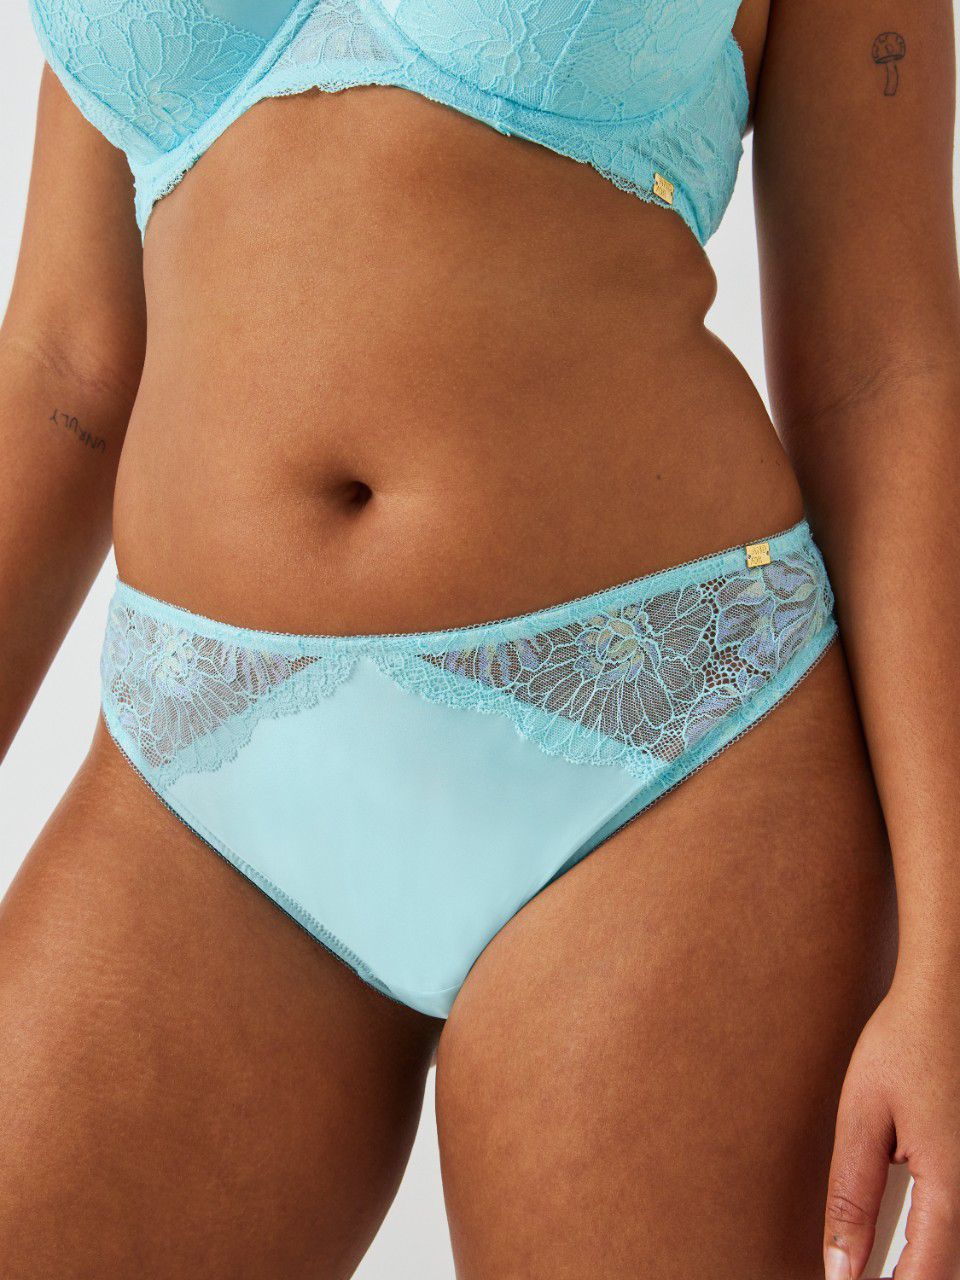 Buy AND/OR Cora Lace Briefs Online at johnlewis.com